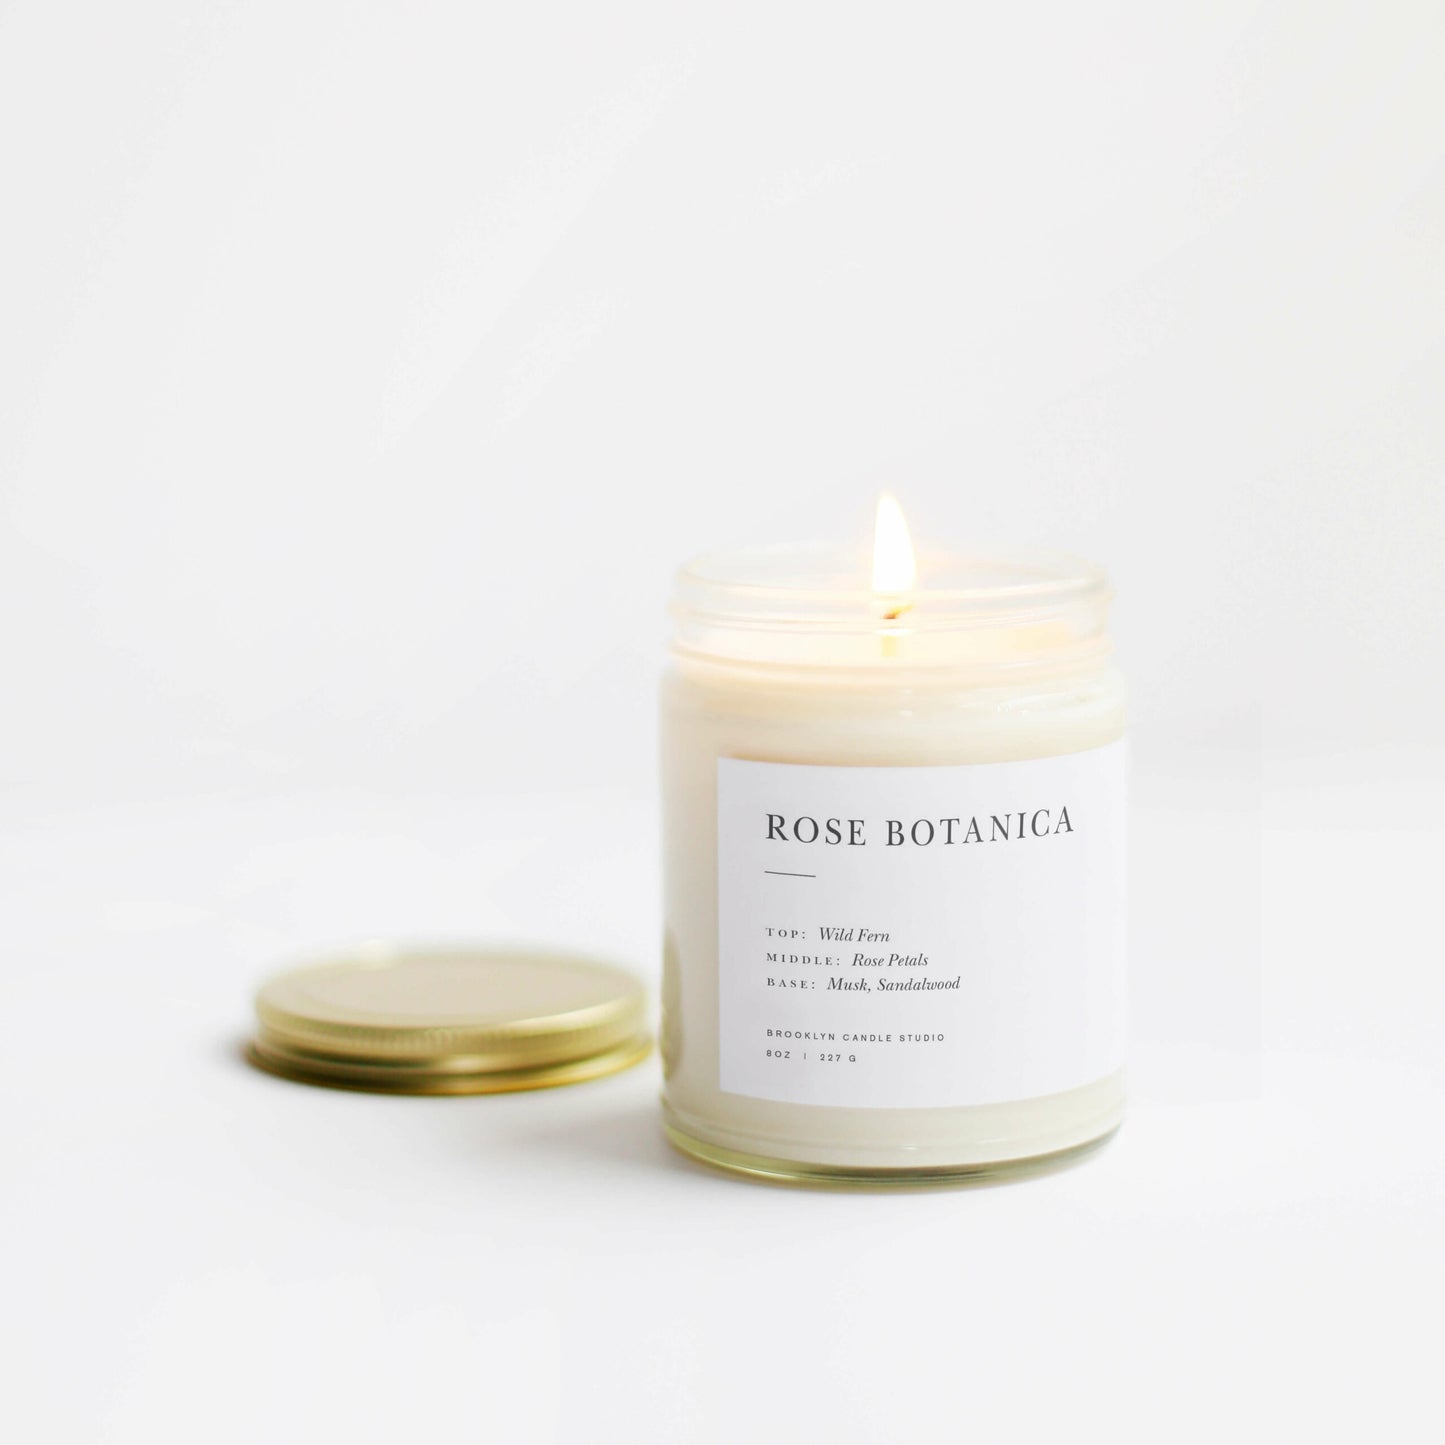 Rose Botanica Candle by Brooklyn Candle Studio